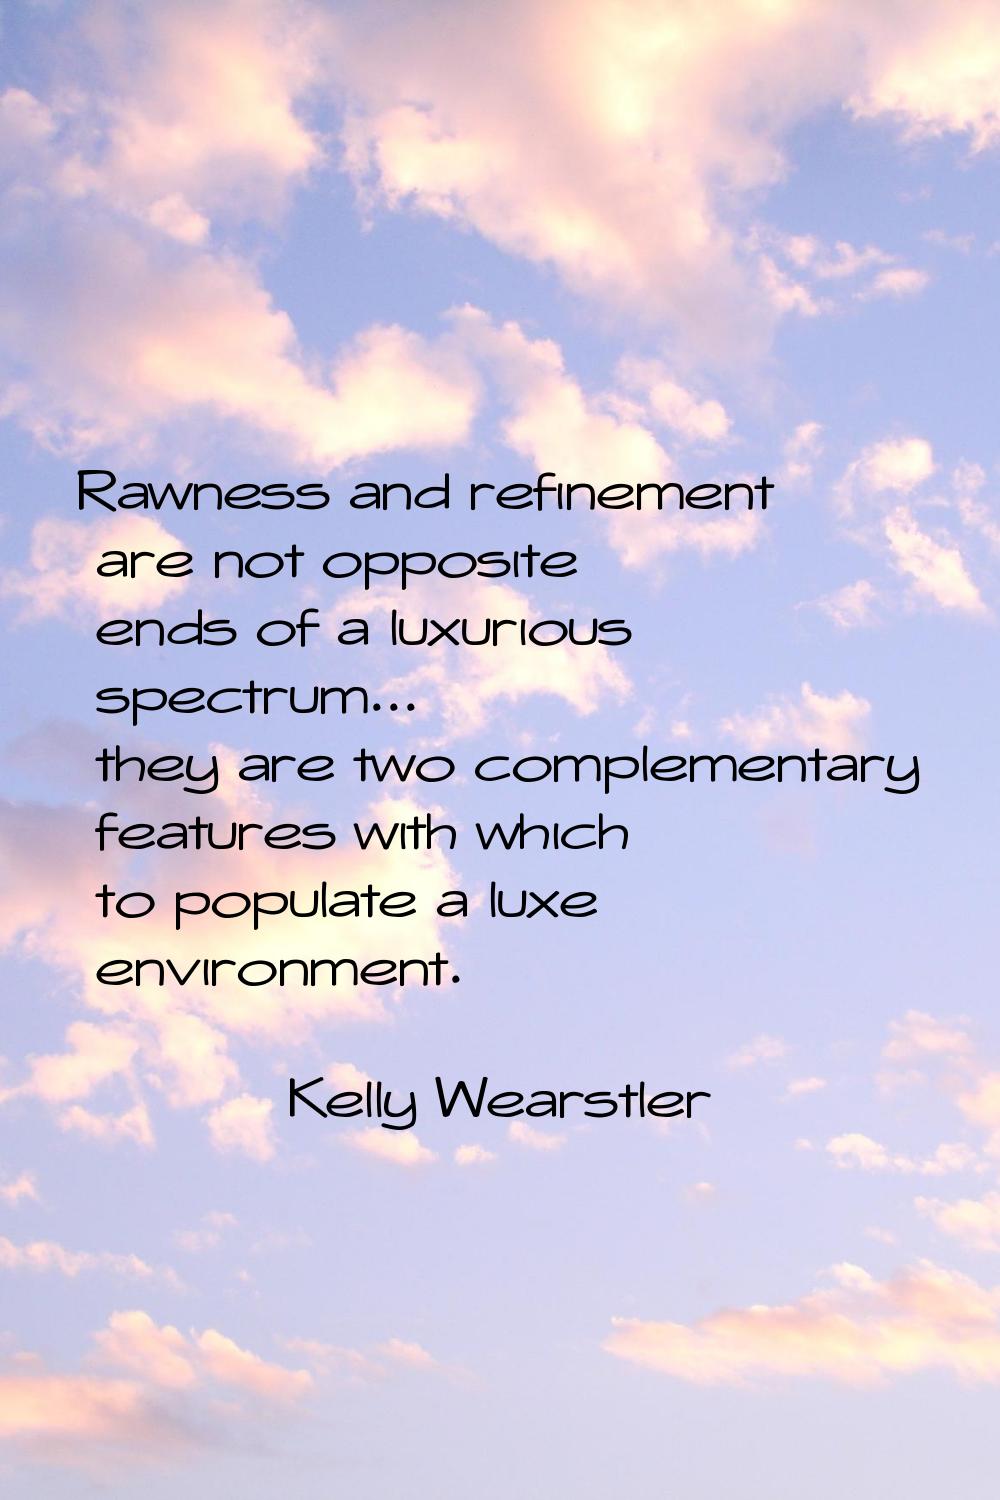 Rawness and refinement are not opposite ends of a luxurious spectrum... they are two complementary 